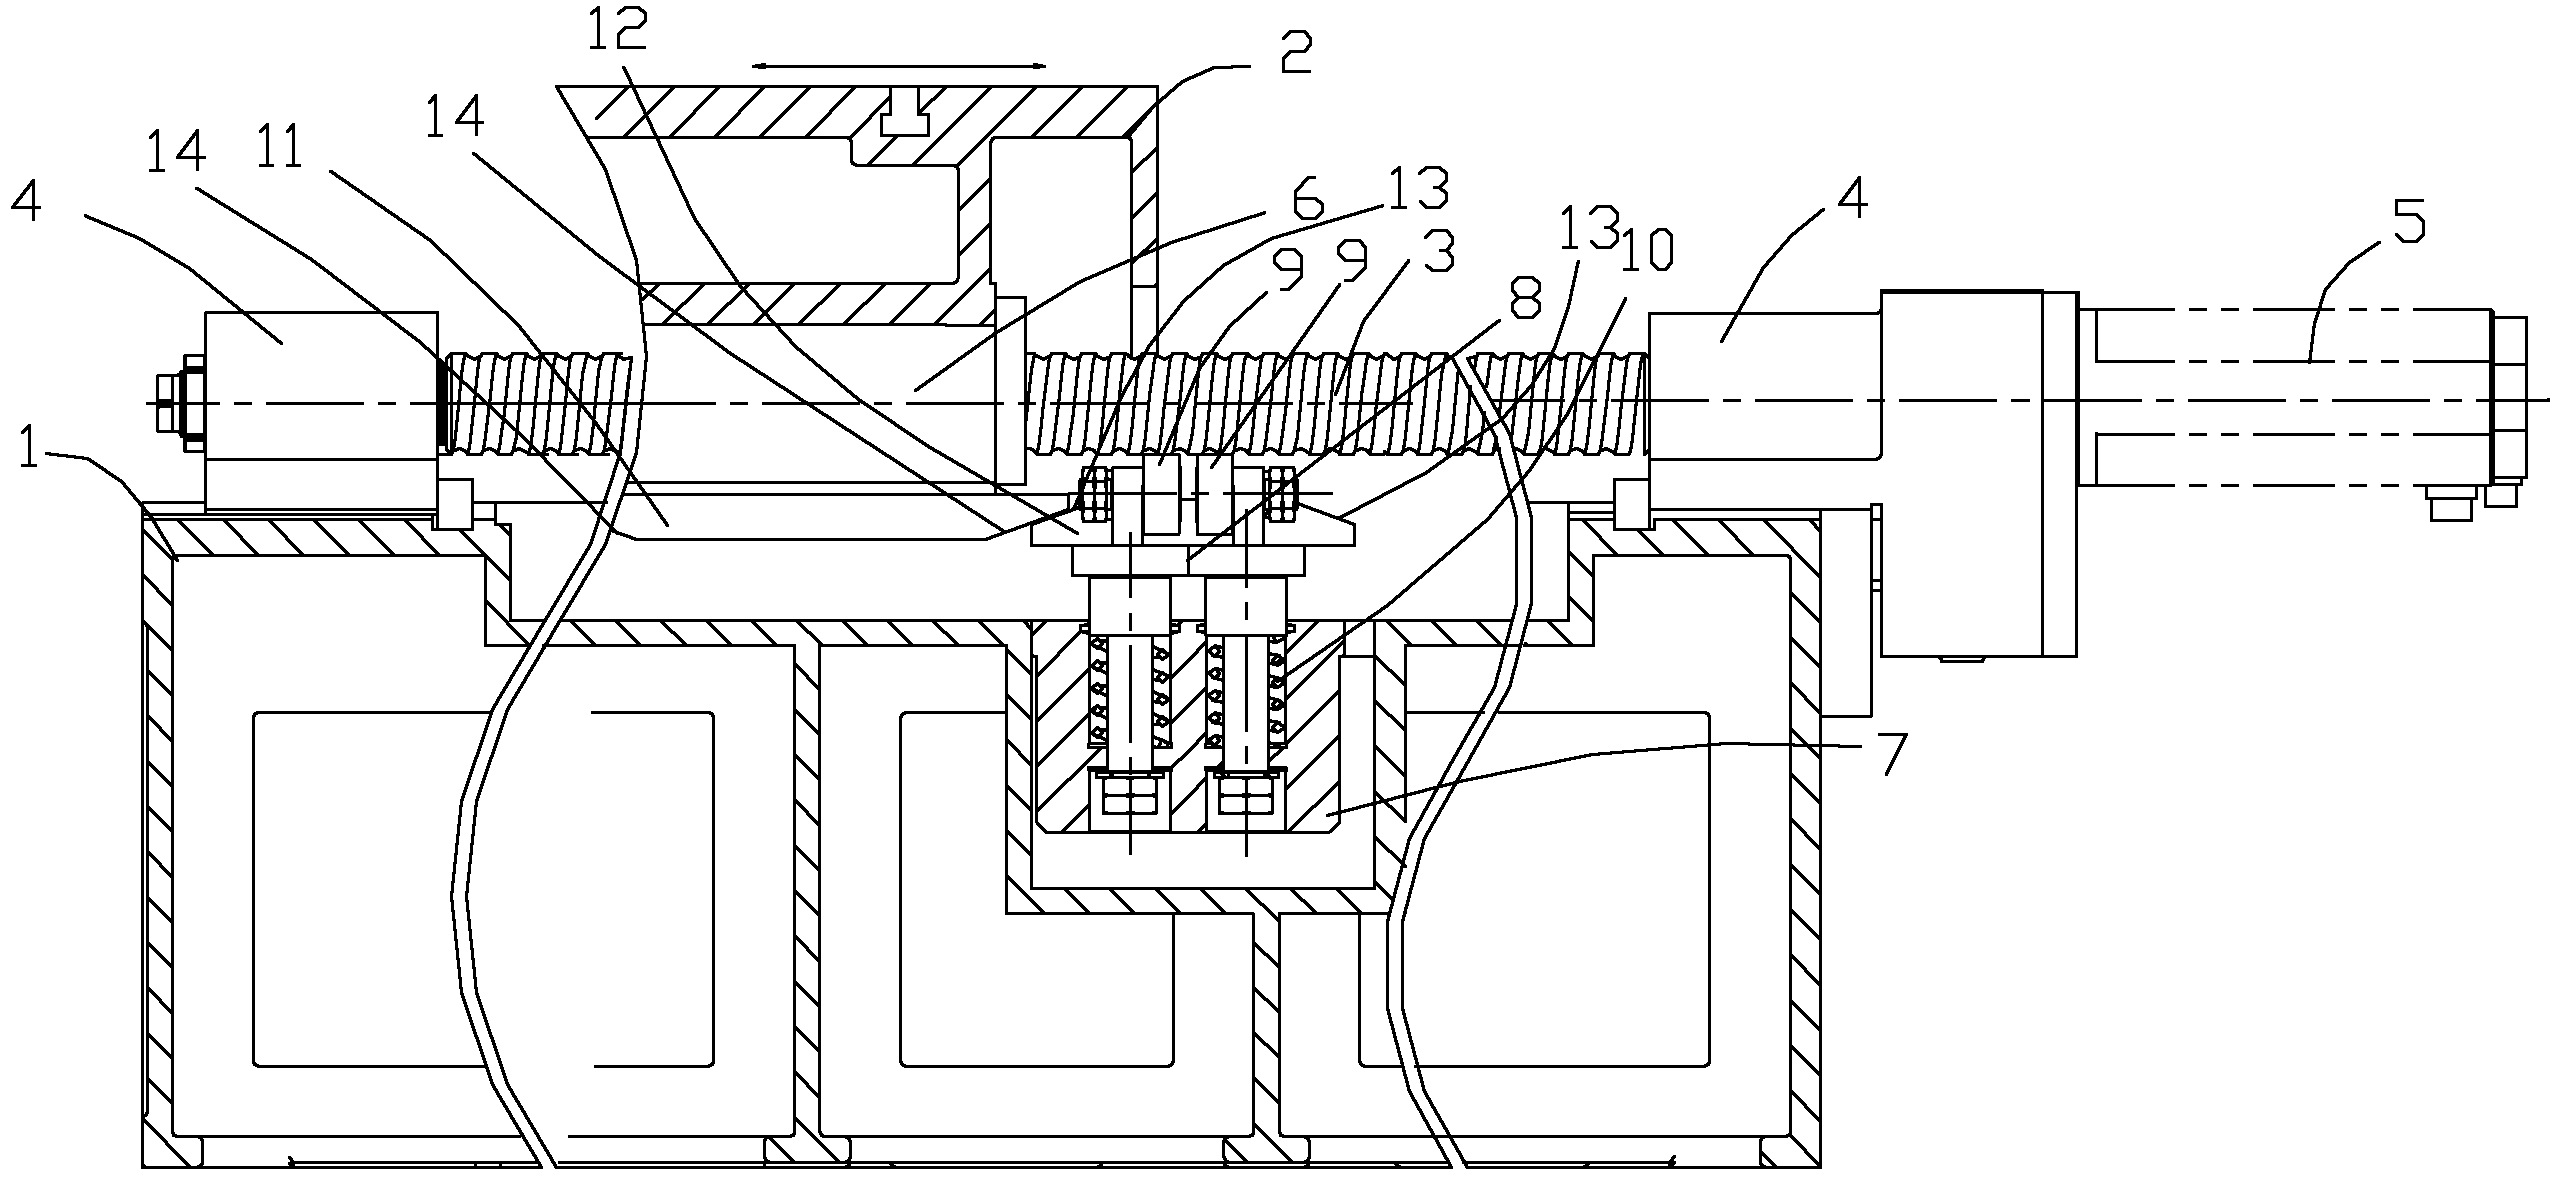 Screw rod supporting device on planer type milling machine with moving workbench